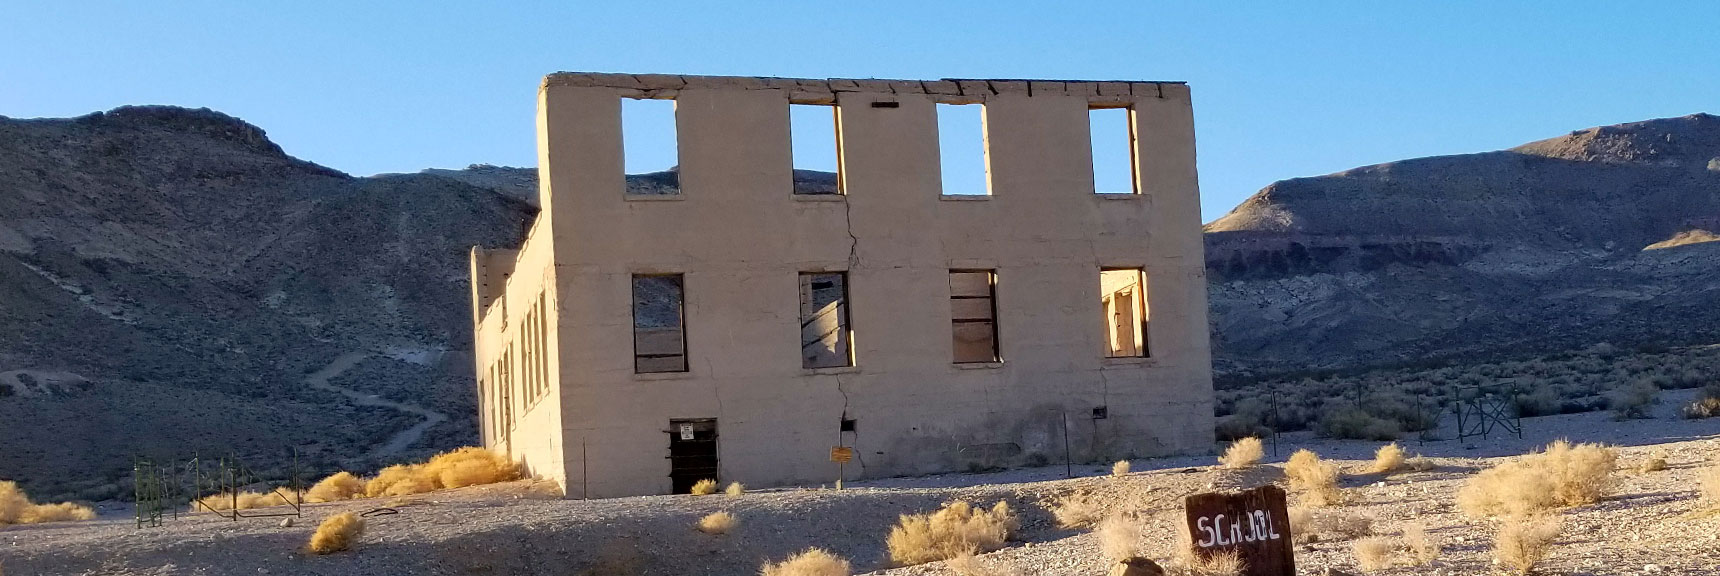 Rhyolite Schoolhouse - 250 Children at Its Height in 1906 and 1907 | Rhyolite Ghost Town | Death Valley Area, Nevada